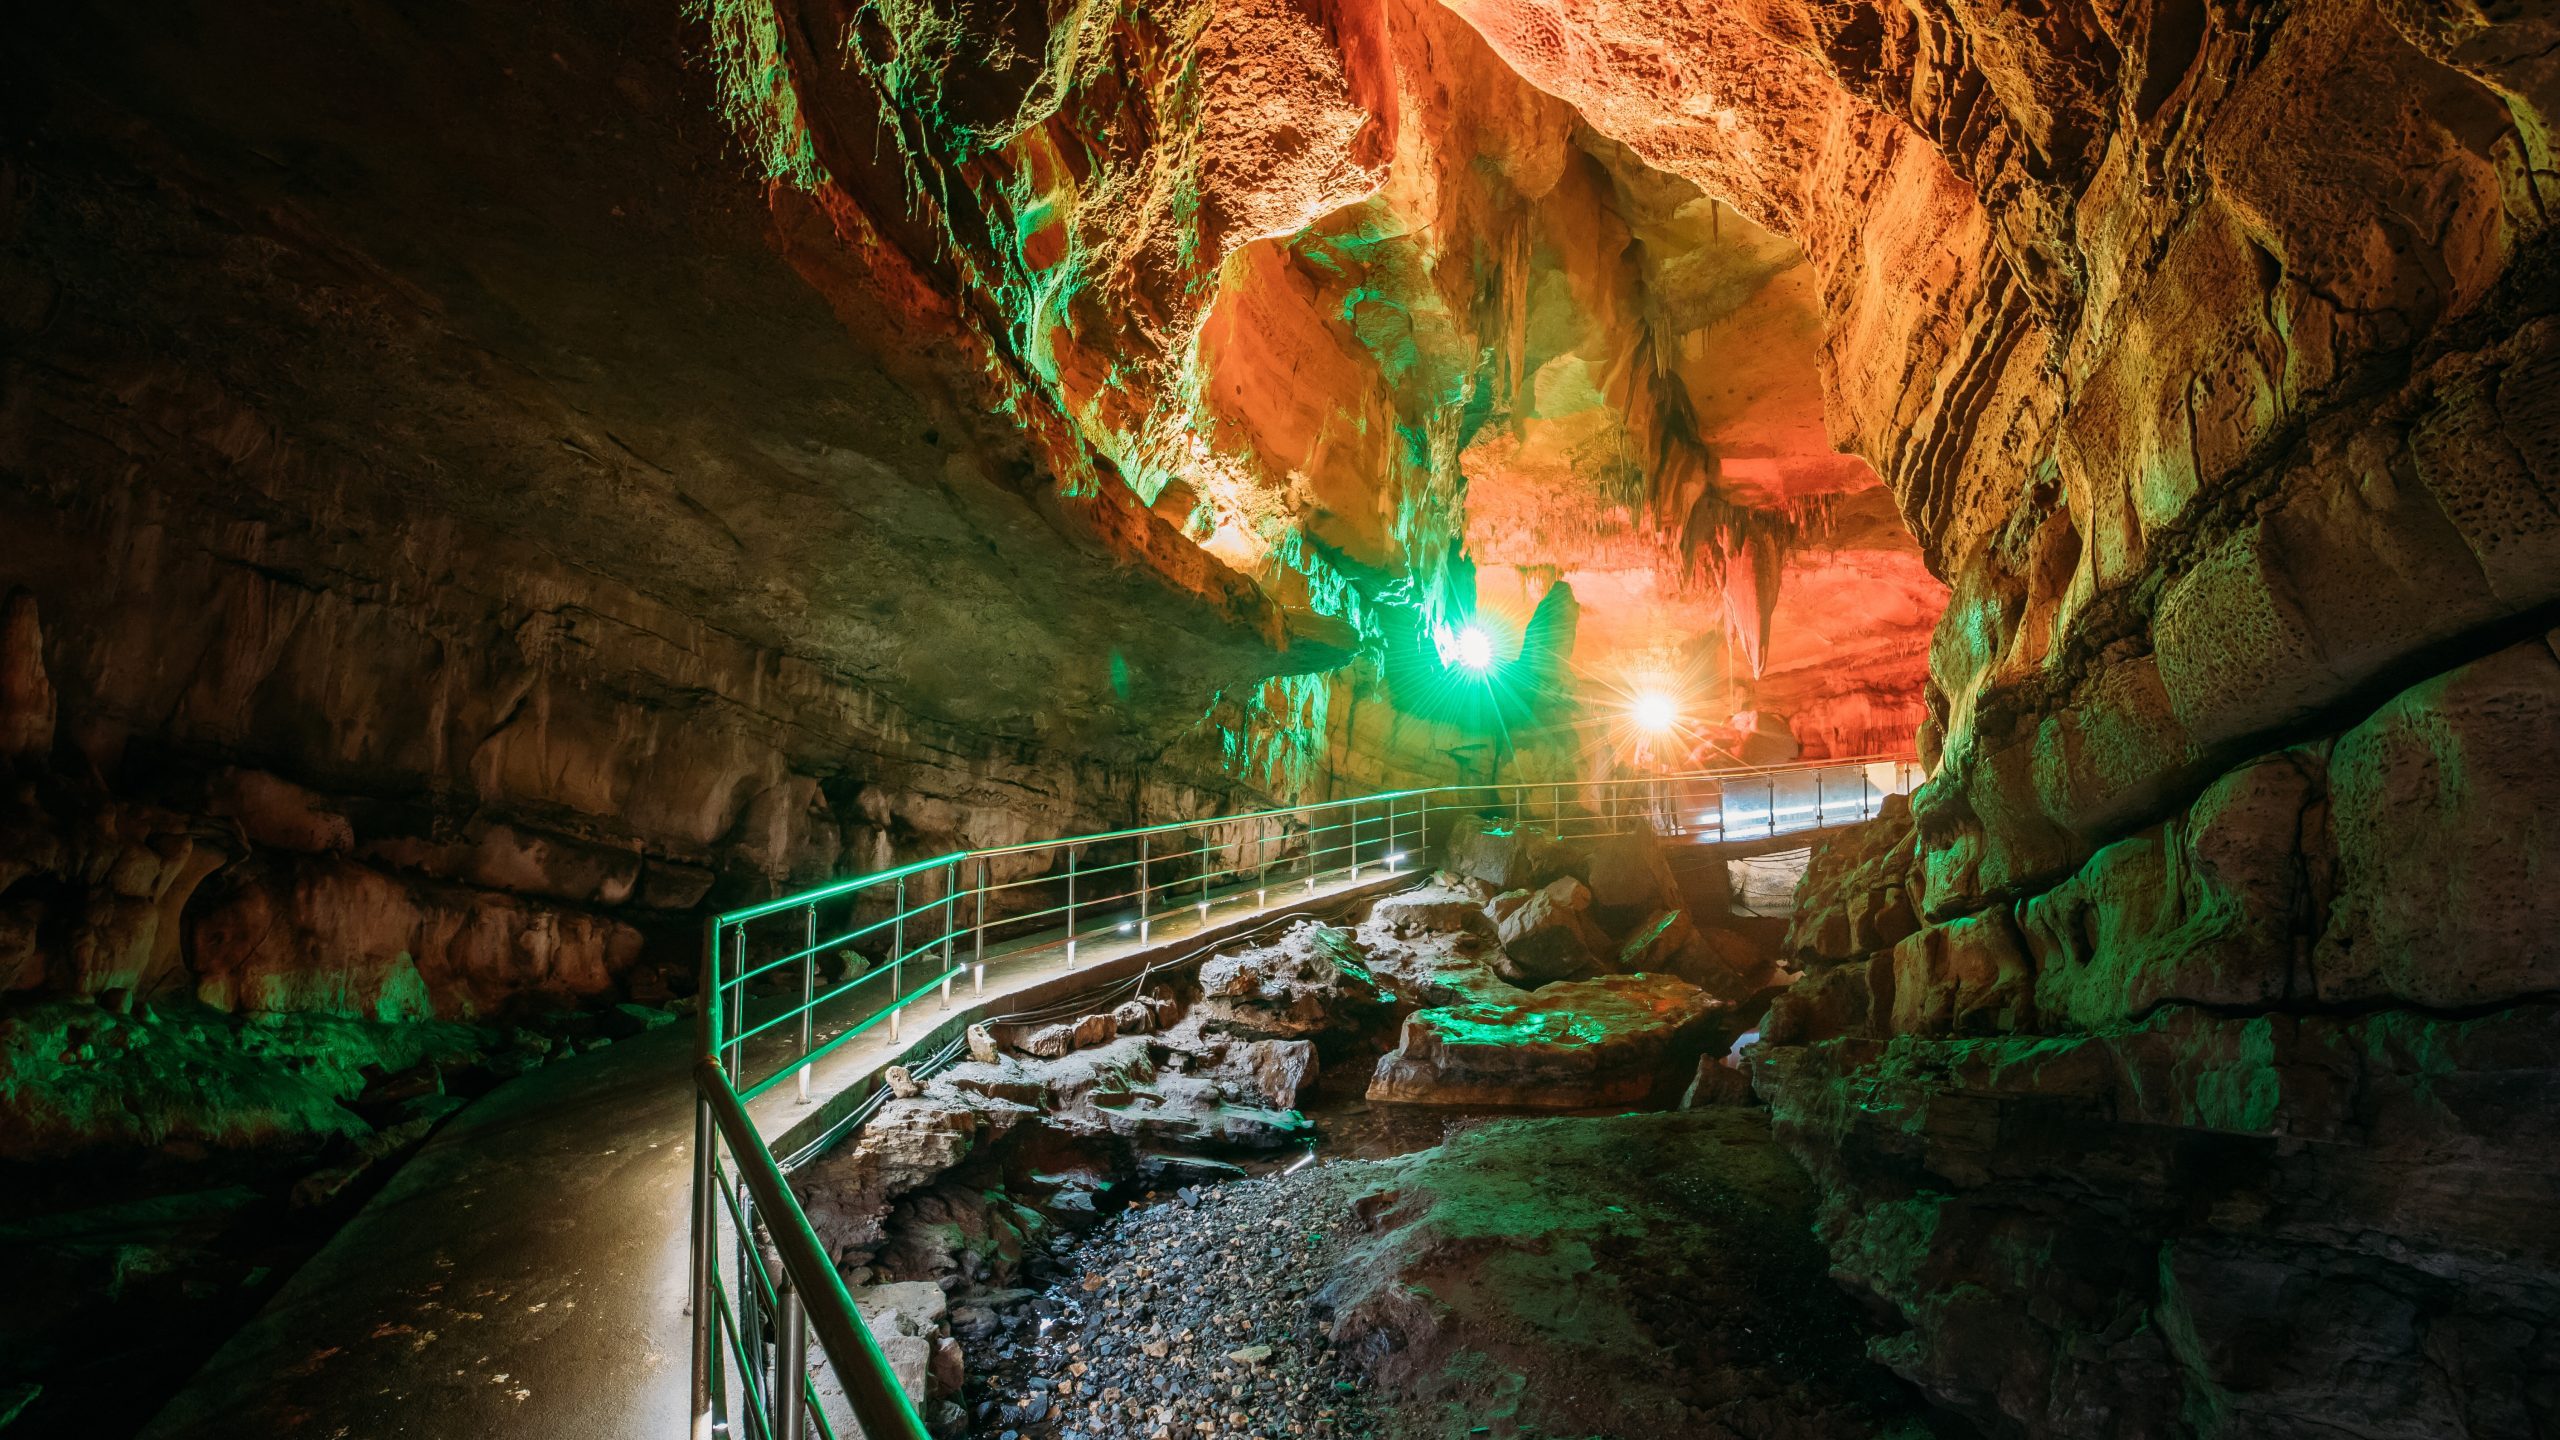 Visit the caves of Aggtelek Karst - eighth thing in the 10 best things to do in Hungary